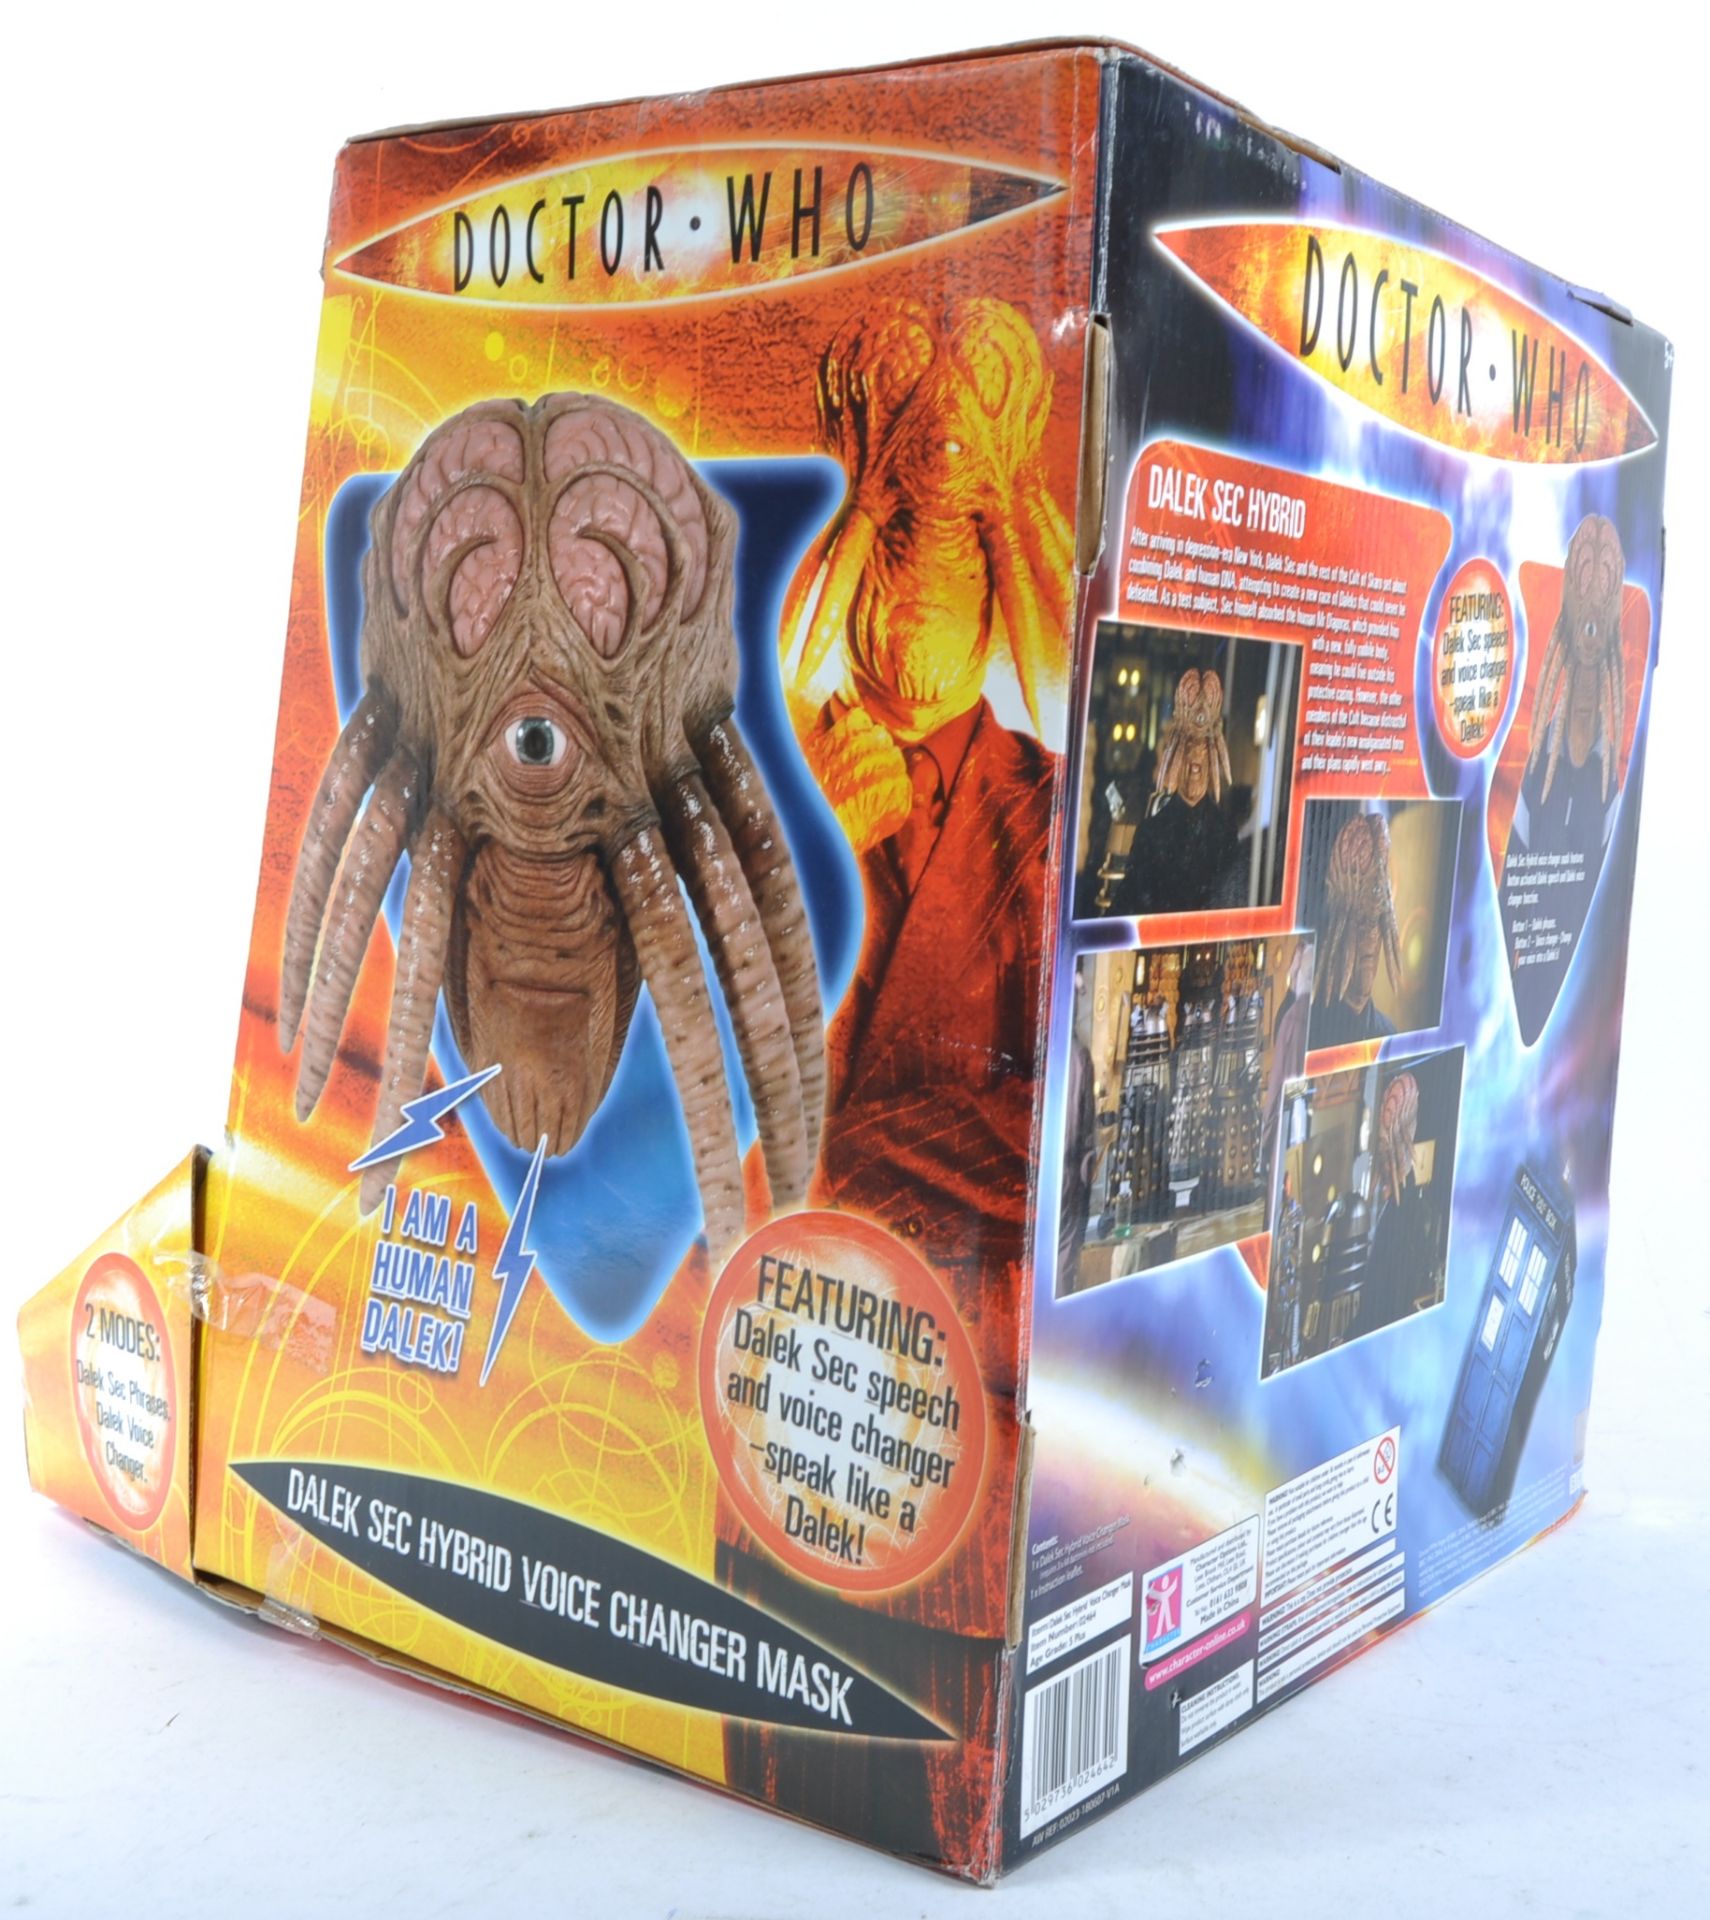 DOCTOR WHO - CHARACTER OPTIONS - DALEK SEC VOICE CHANGE MASK - Image 4 of 4